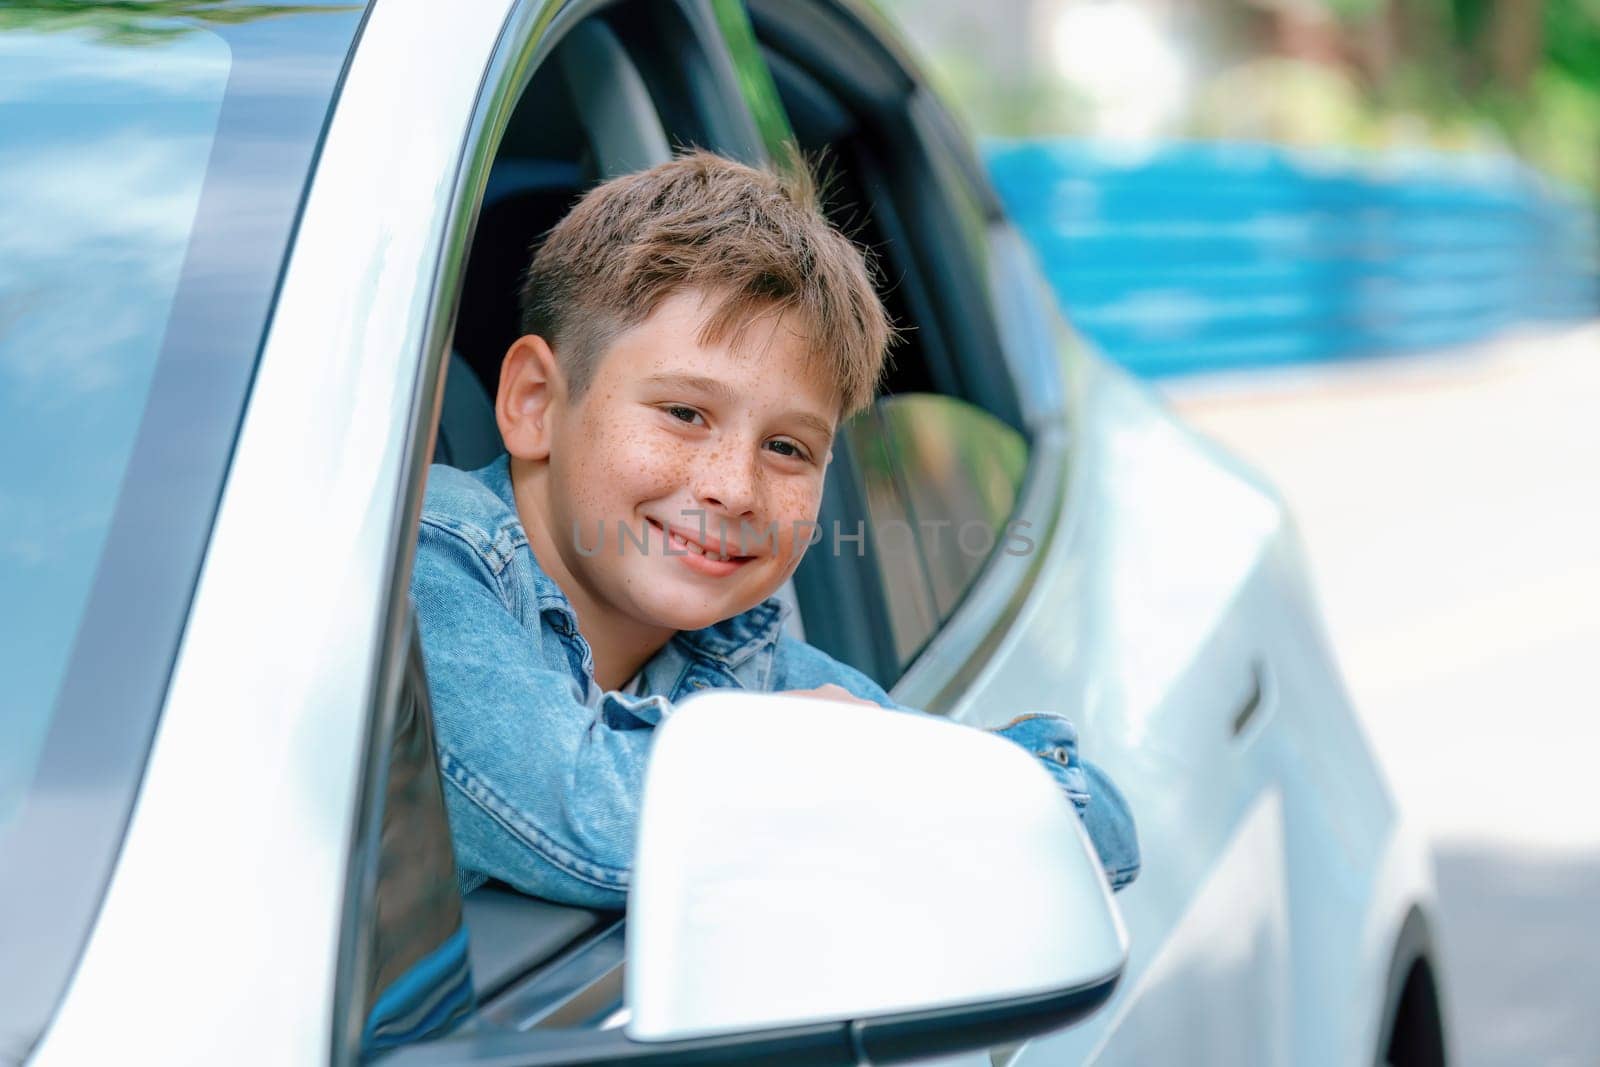 Excited and happy young little boy with smile on his face show up on car window while driving, playful and cheerful expression while on the road trip traveling by car during summertime. Perpetual